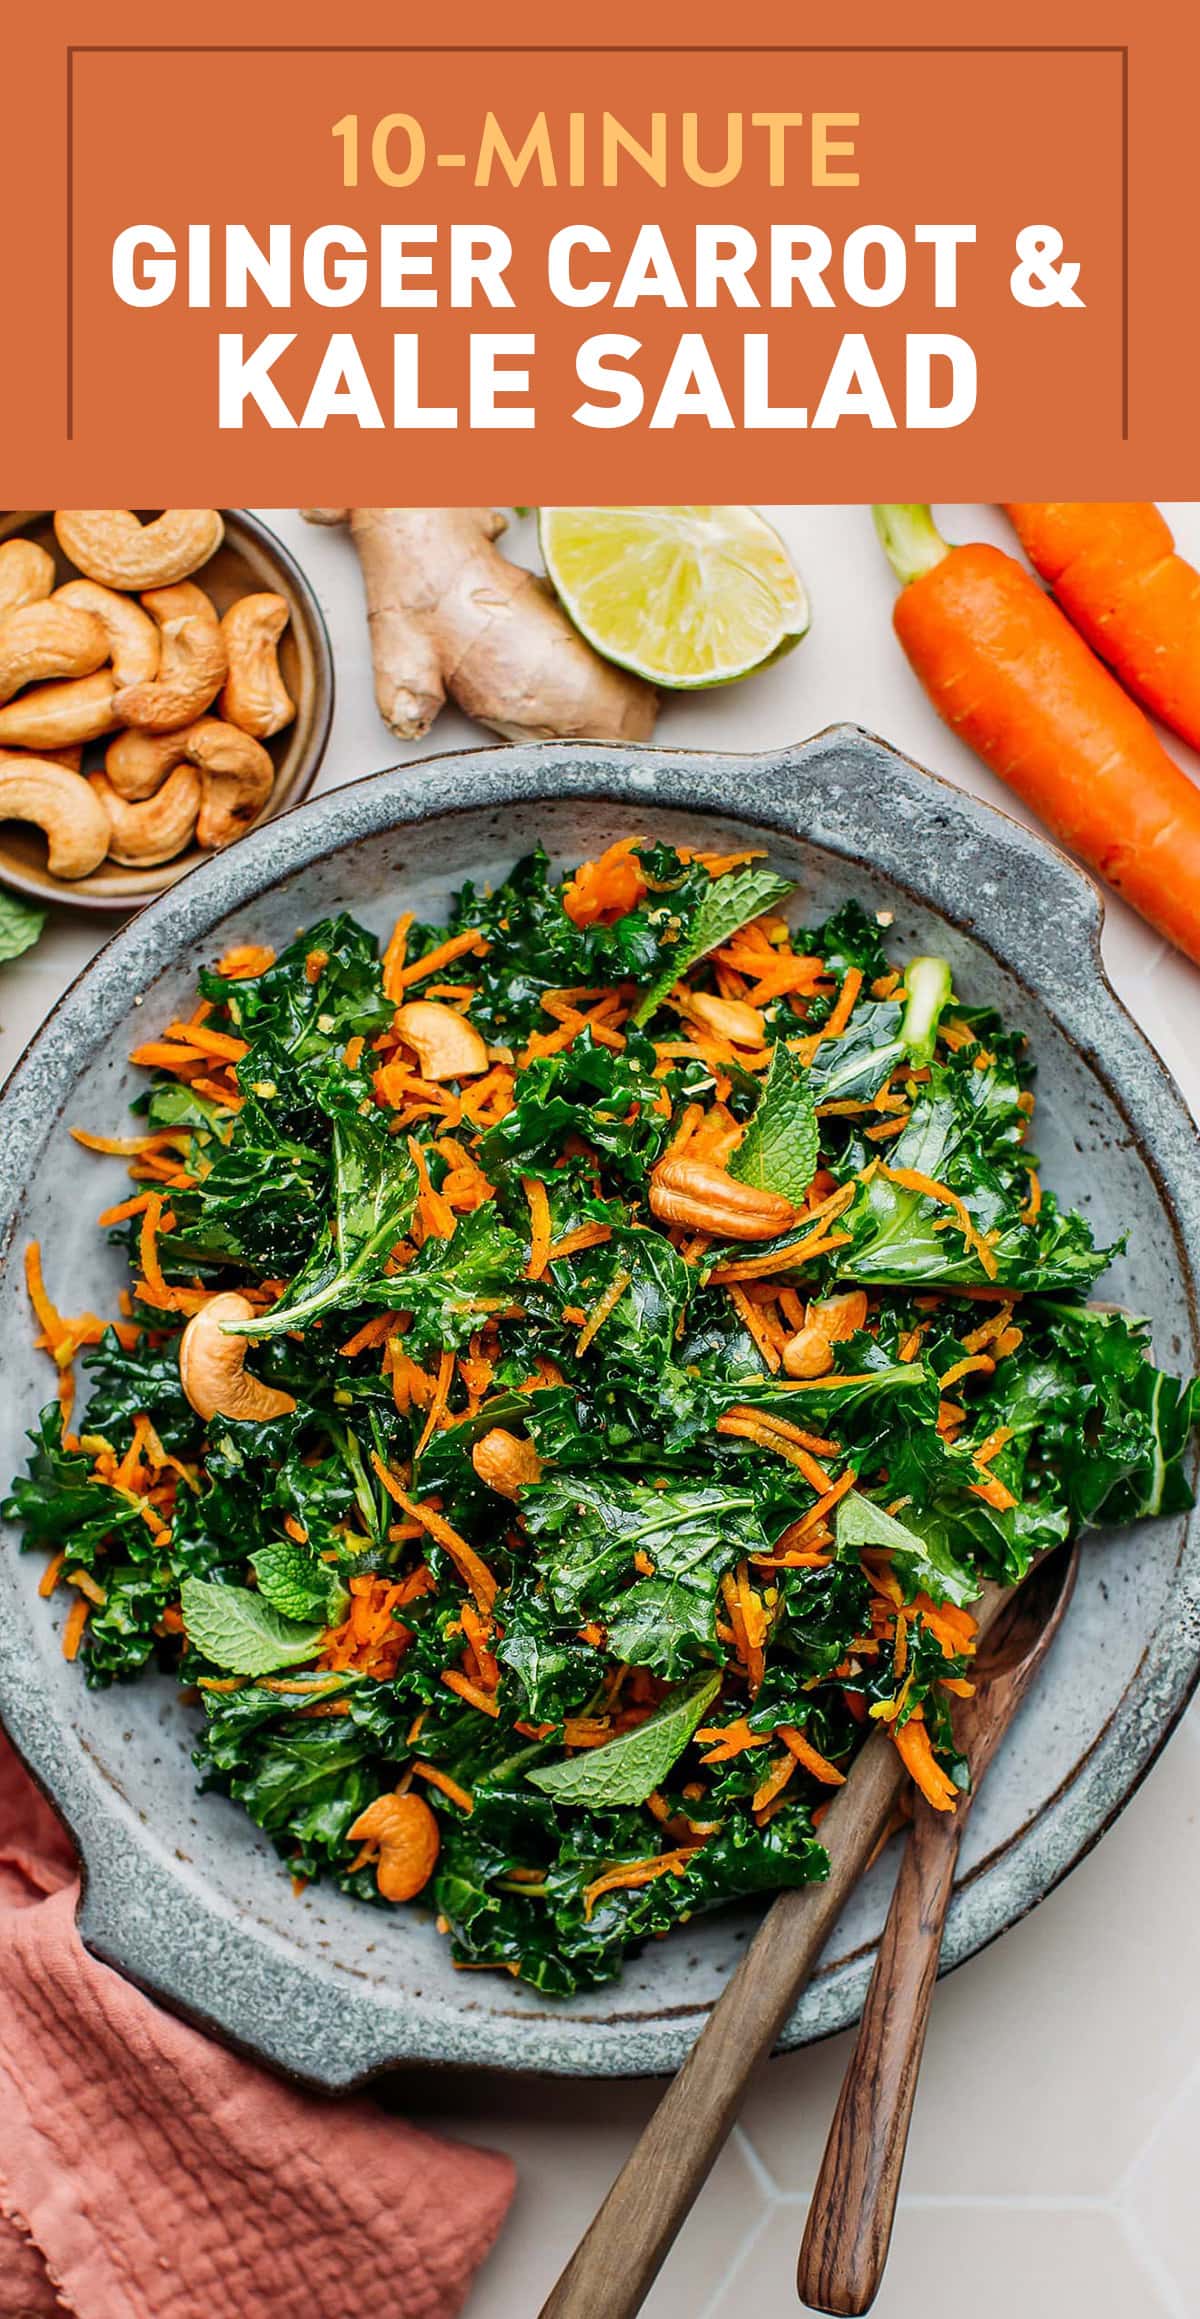 This oil-free kale and carrot salad is fresh, tasty, easy to make, and perfect for a light dinner or an appetizer. It requires just 7 simple ingredients and is infused with ginger for a zesty and spicy flavor! #salad #plantbased #vegan #kale